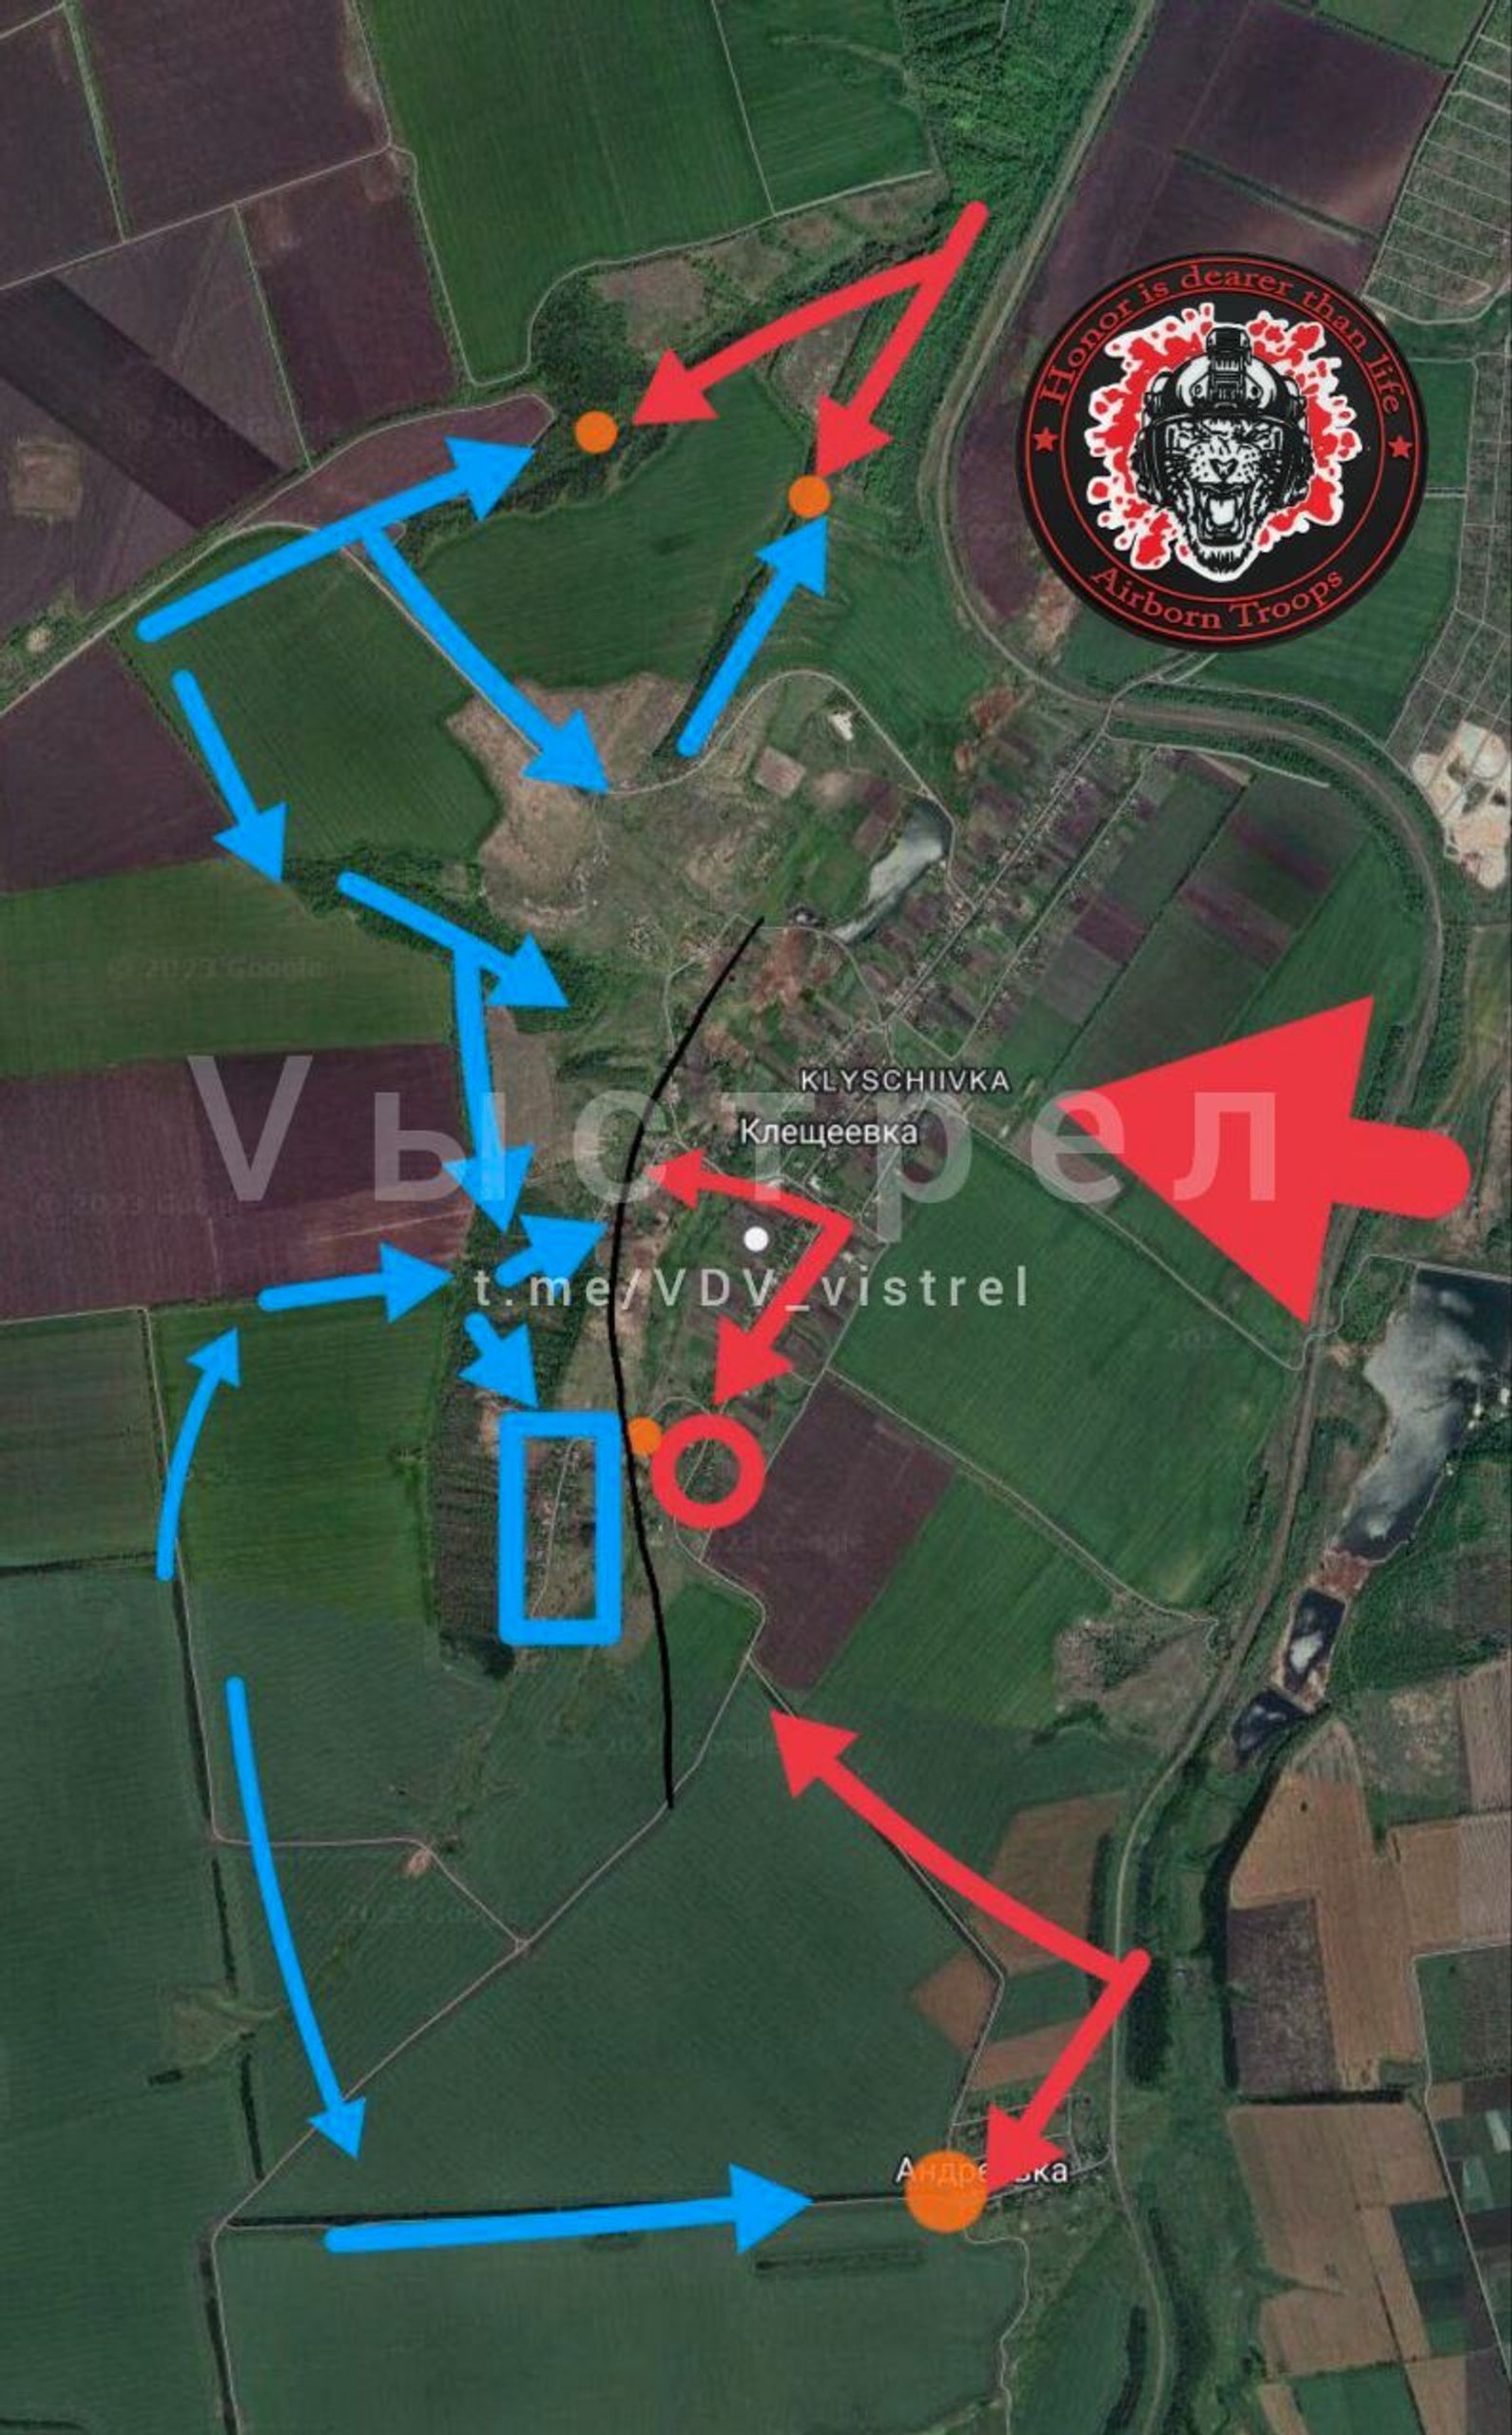 The situation in Klishchiivka according to the “Vystrel” Telegram channel